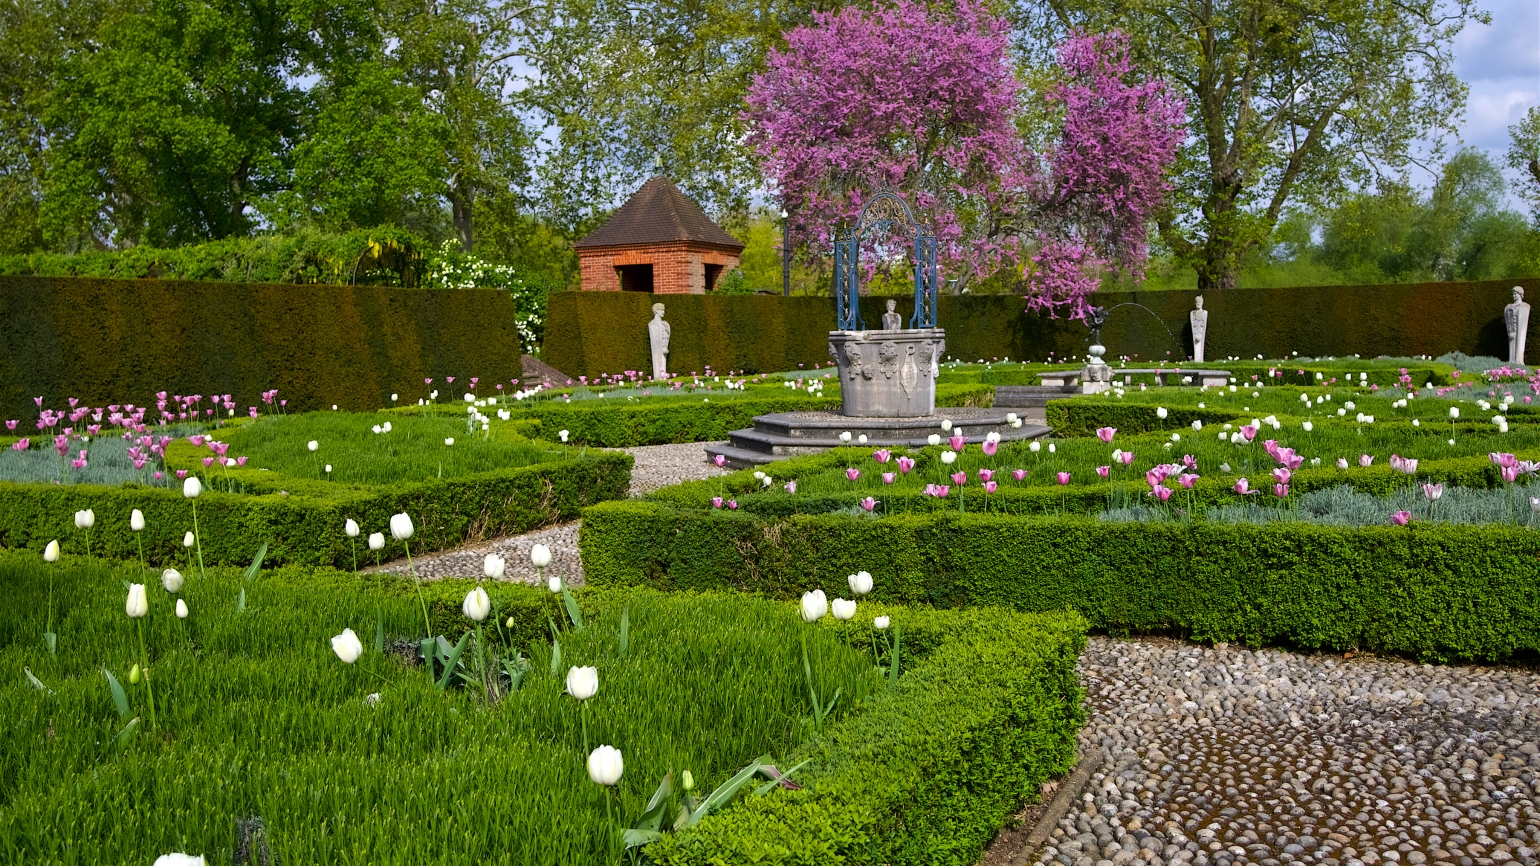 A garden with box hedges, tulips and statues